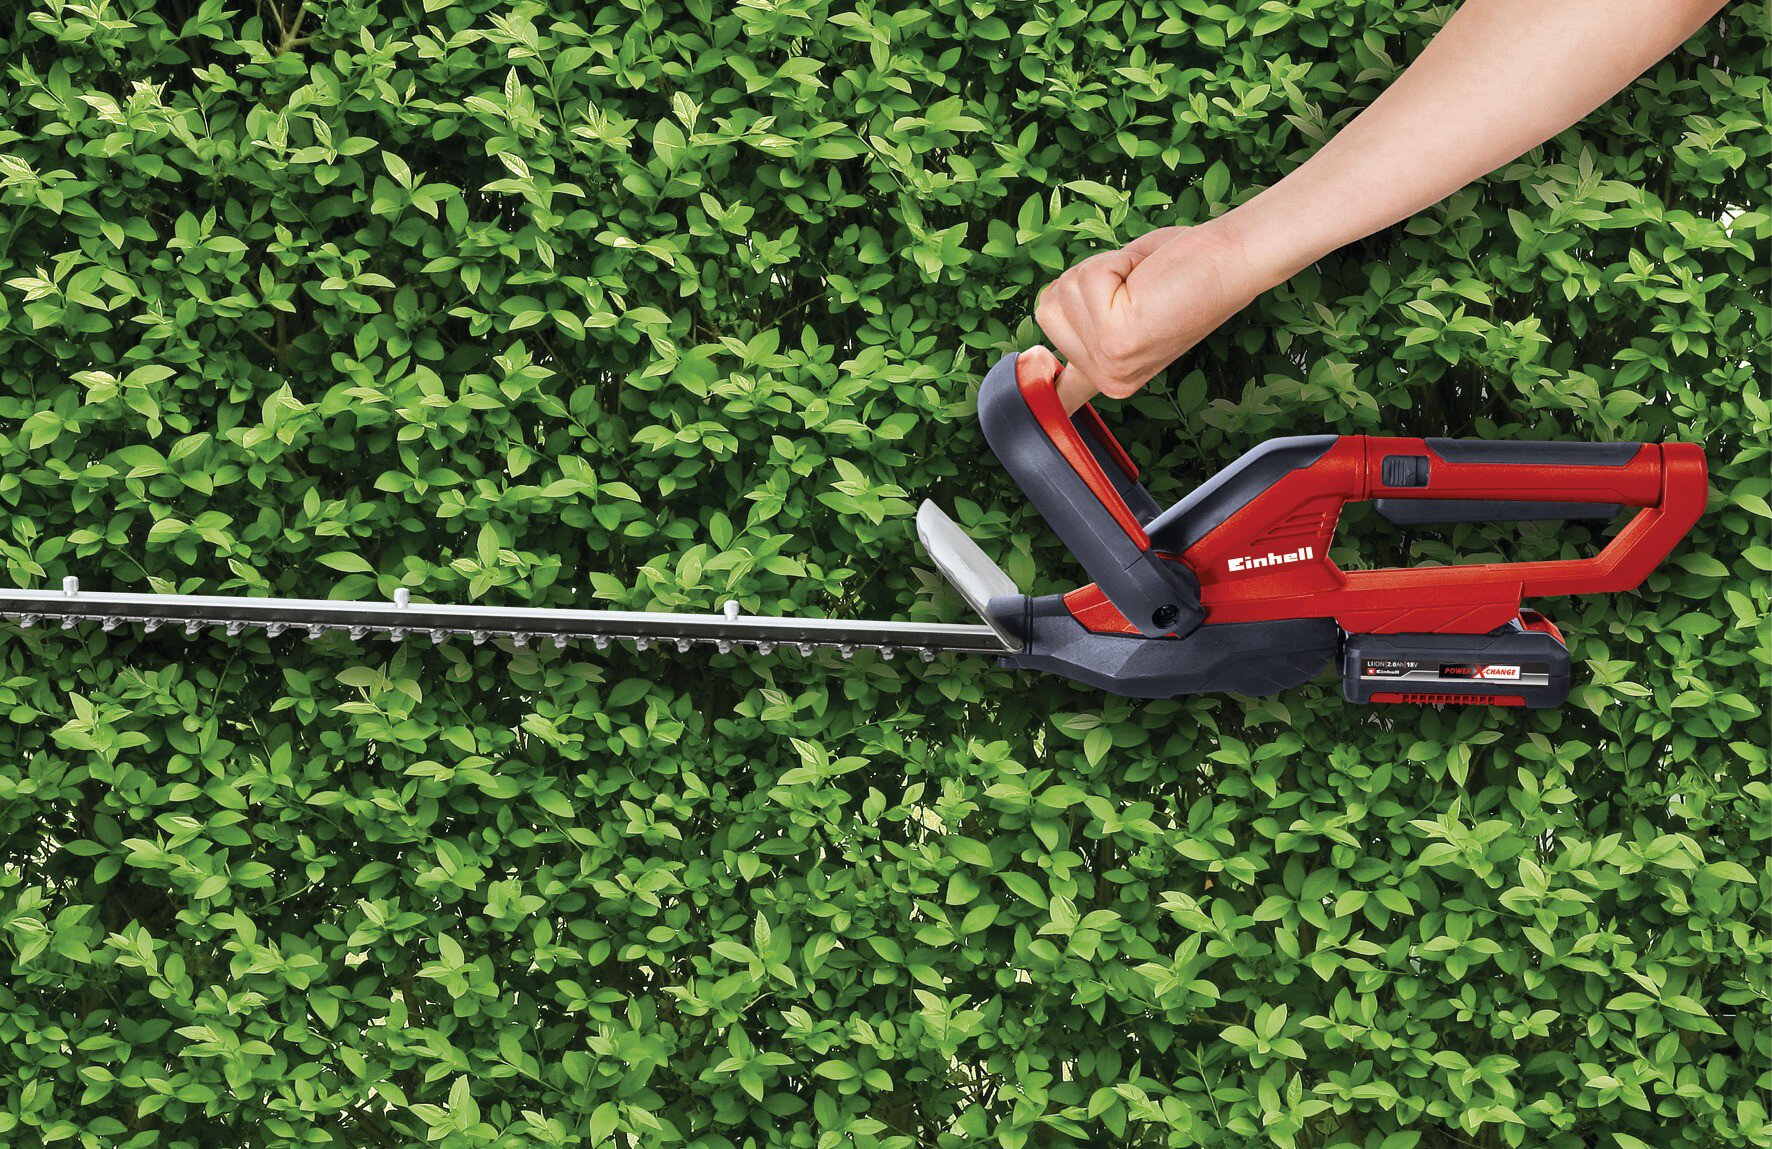 einhell-classic-cordless-hedge-trimmer-3410506-example_usage-001